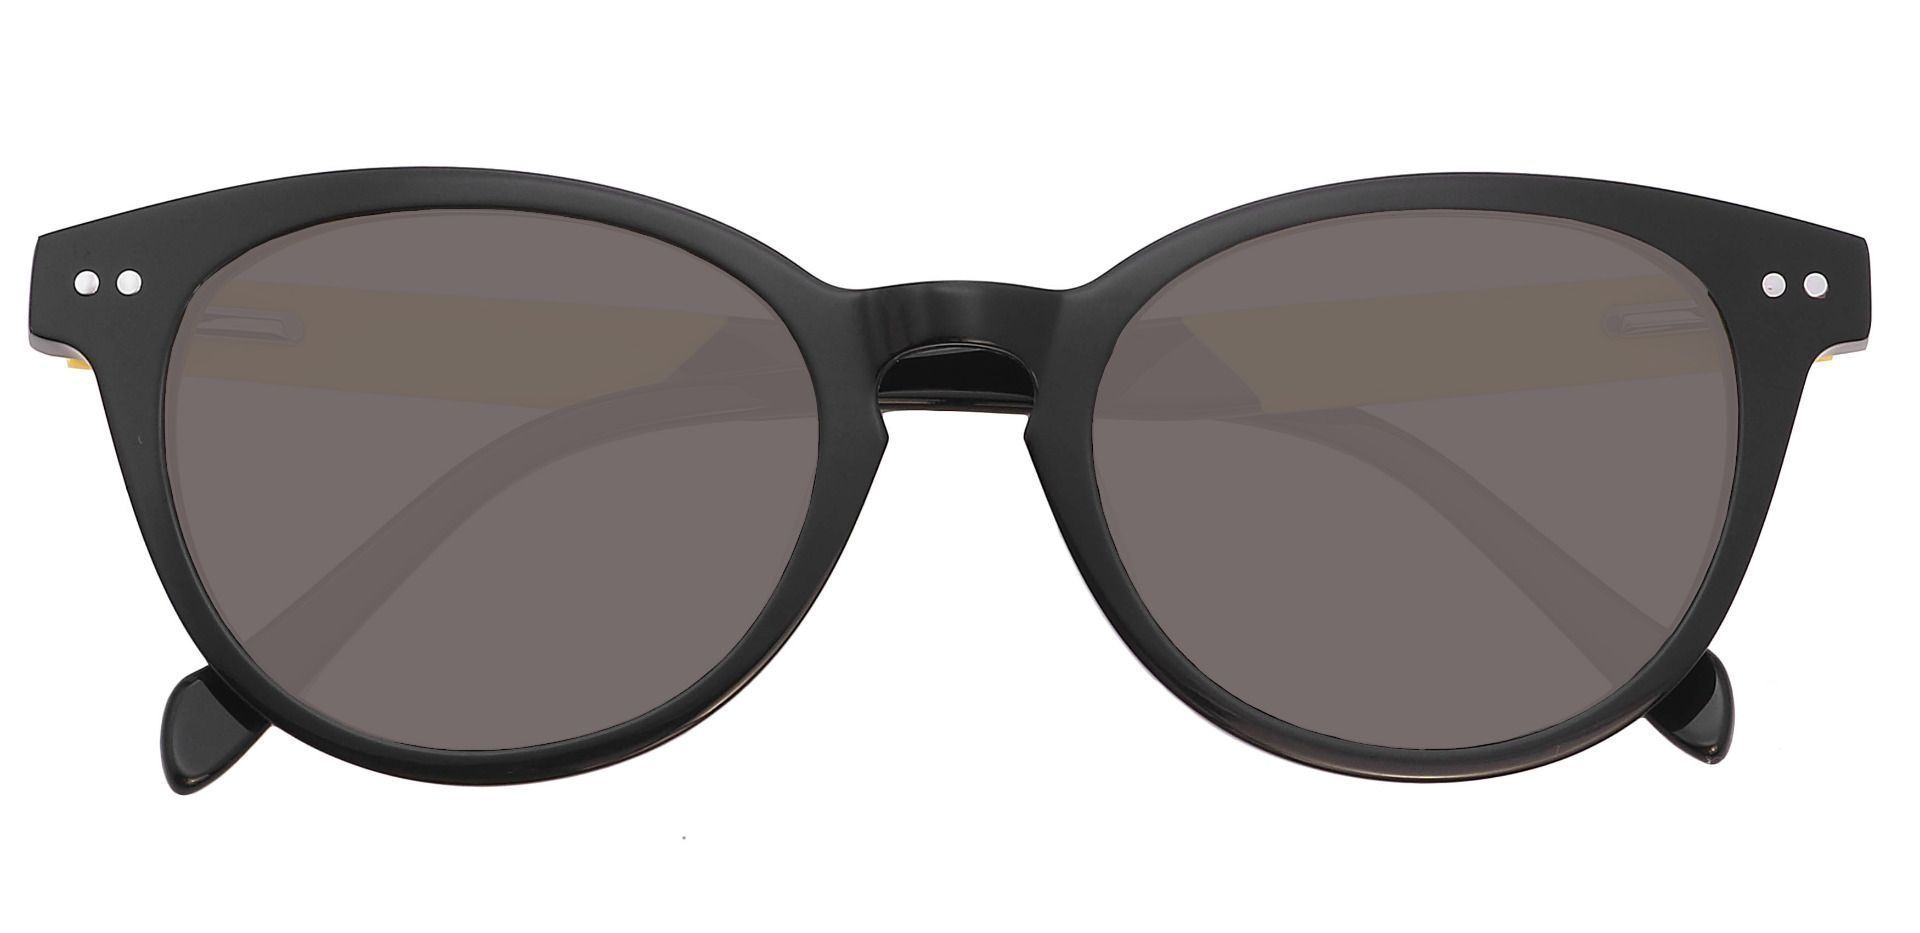 Forbes Oval Lined Bifocal Sunglasses - Black Frame With Gray Lenses